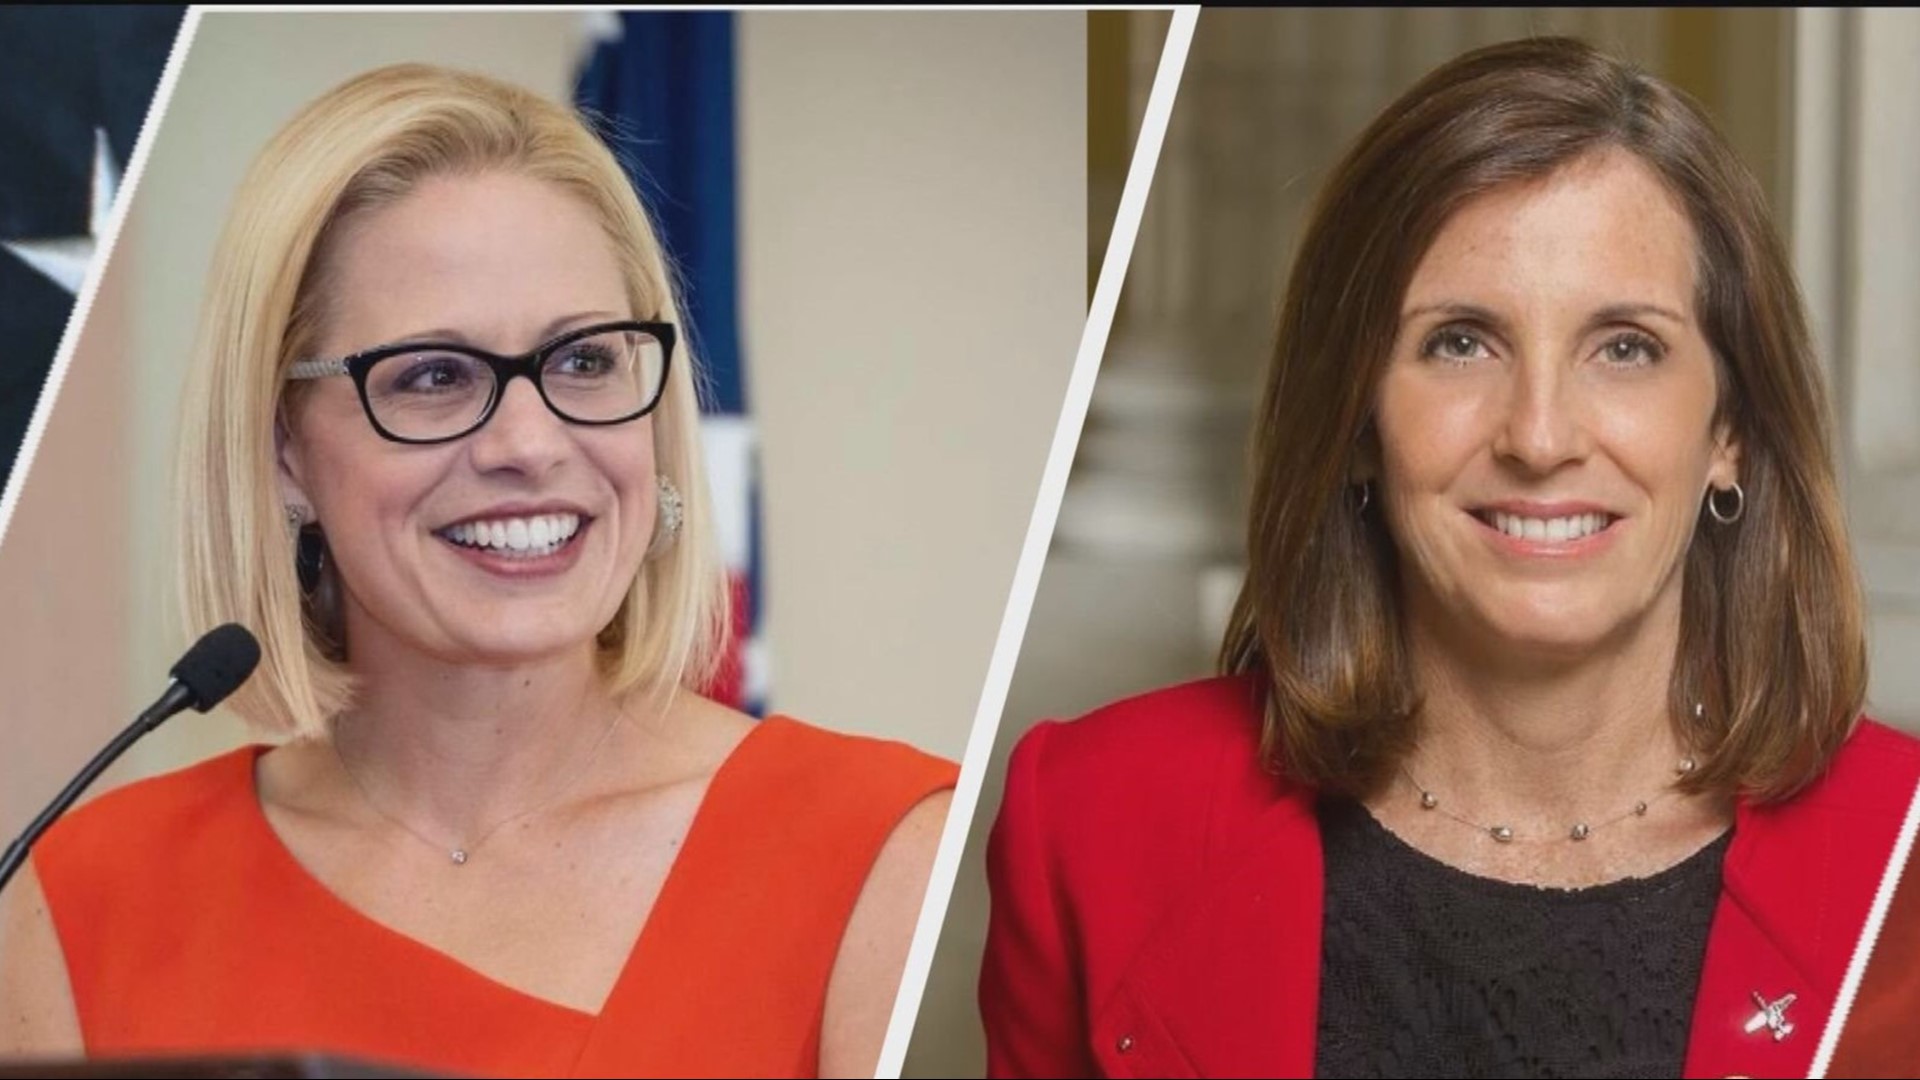 The race between Kyrsten Sinema and Martha McSally for a seat in the U.S. Senate is getting heated. We break down who the candidates are and what their voting record is.